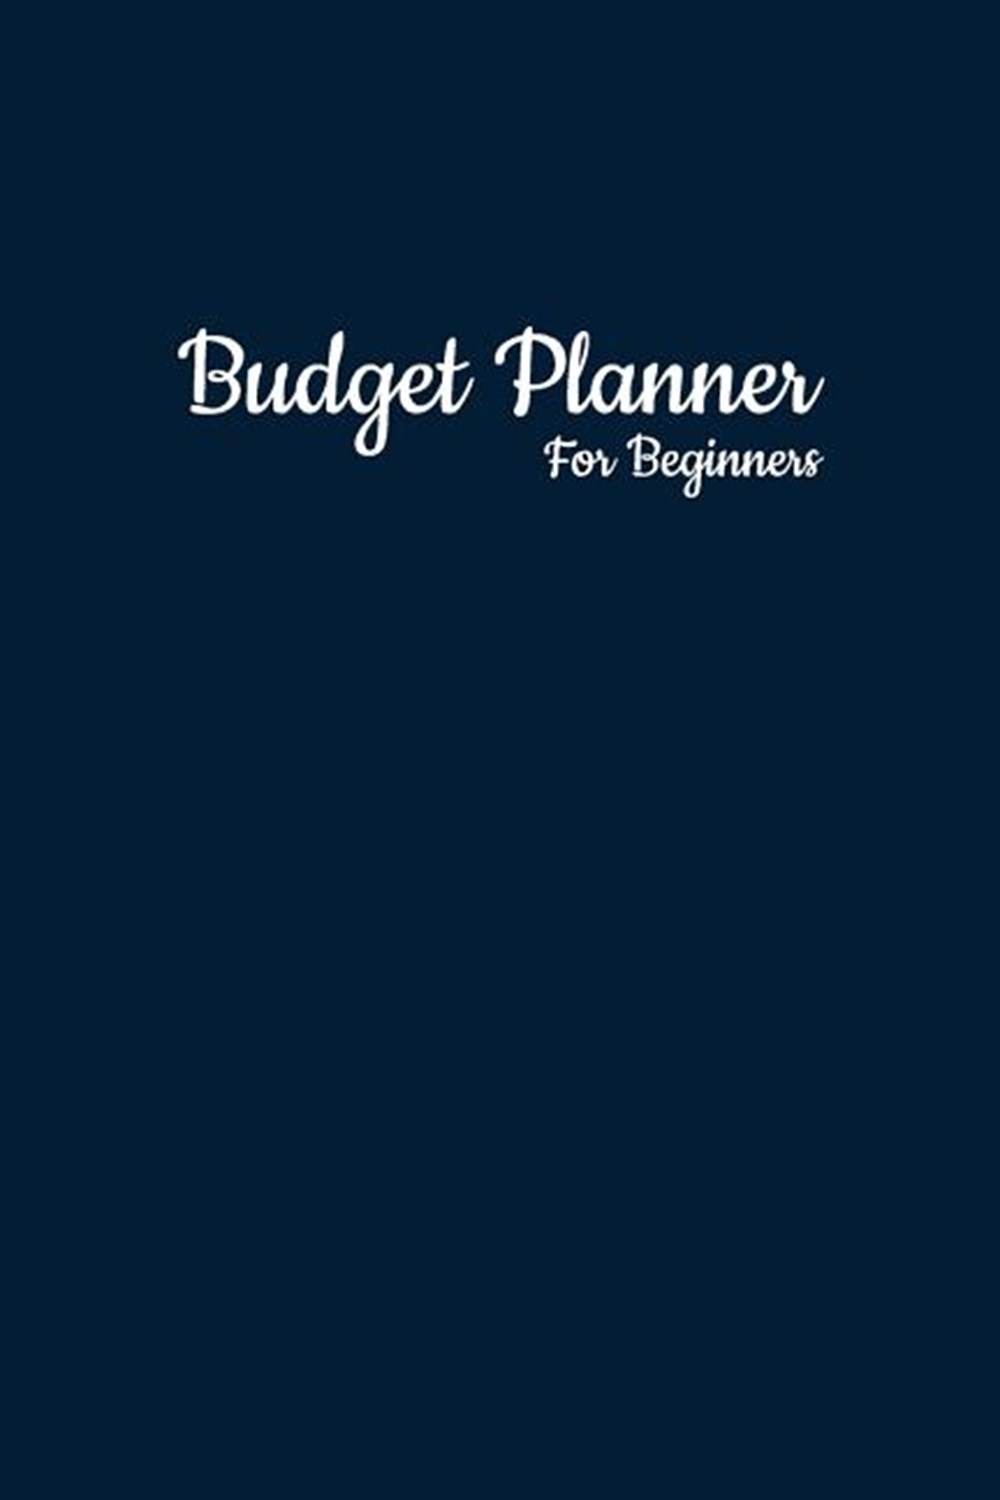 Budget Planner For Beginners Spending Tracker and Bill Organizer Book Blue Black Undated